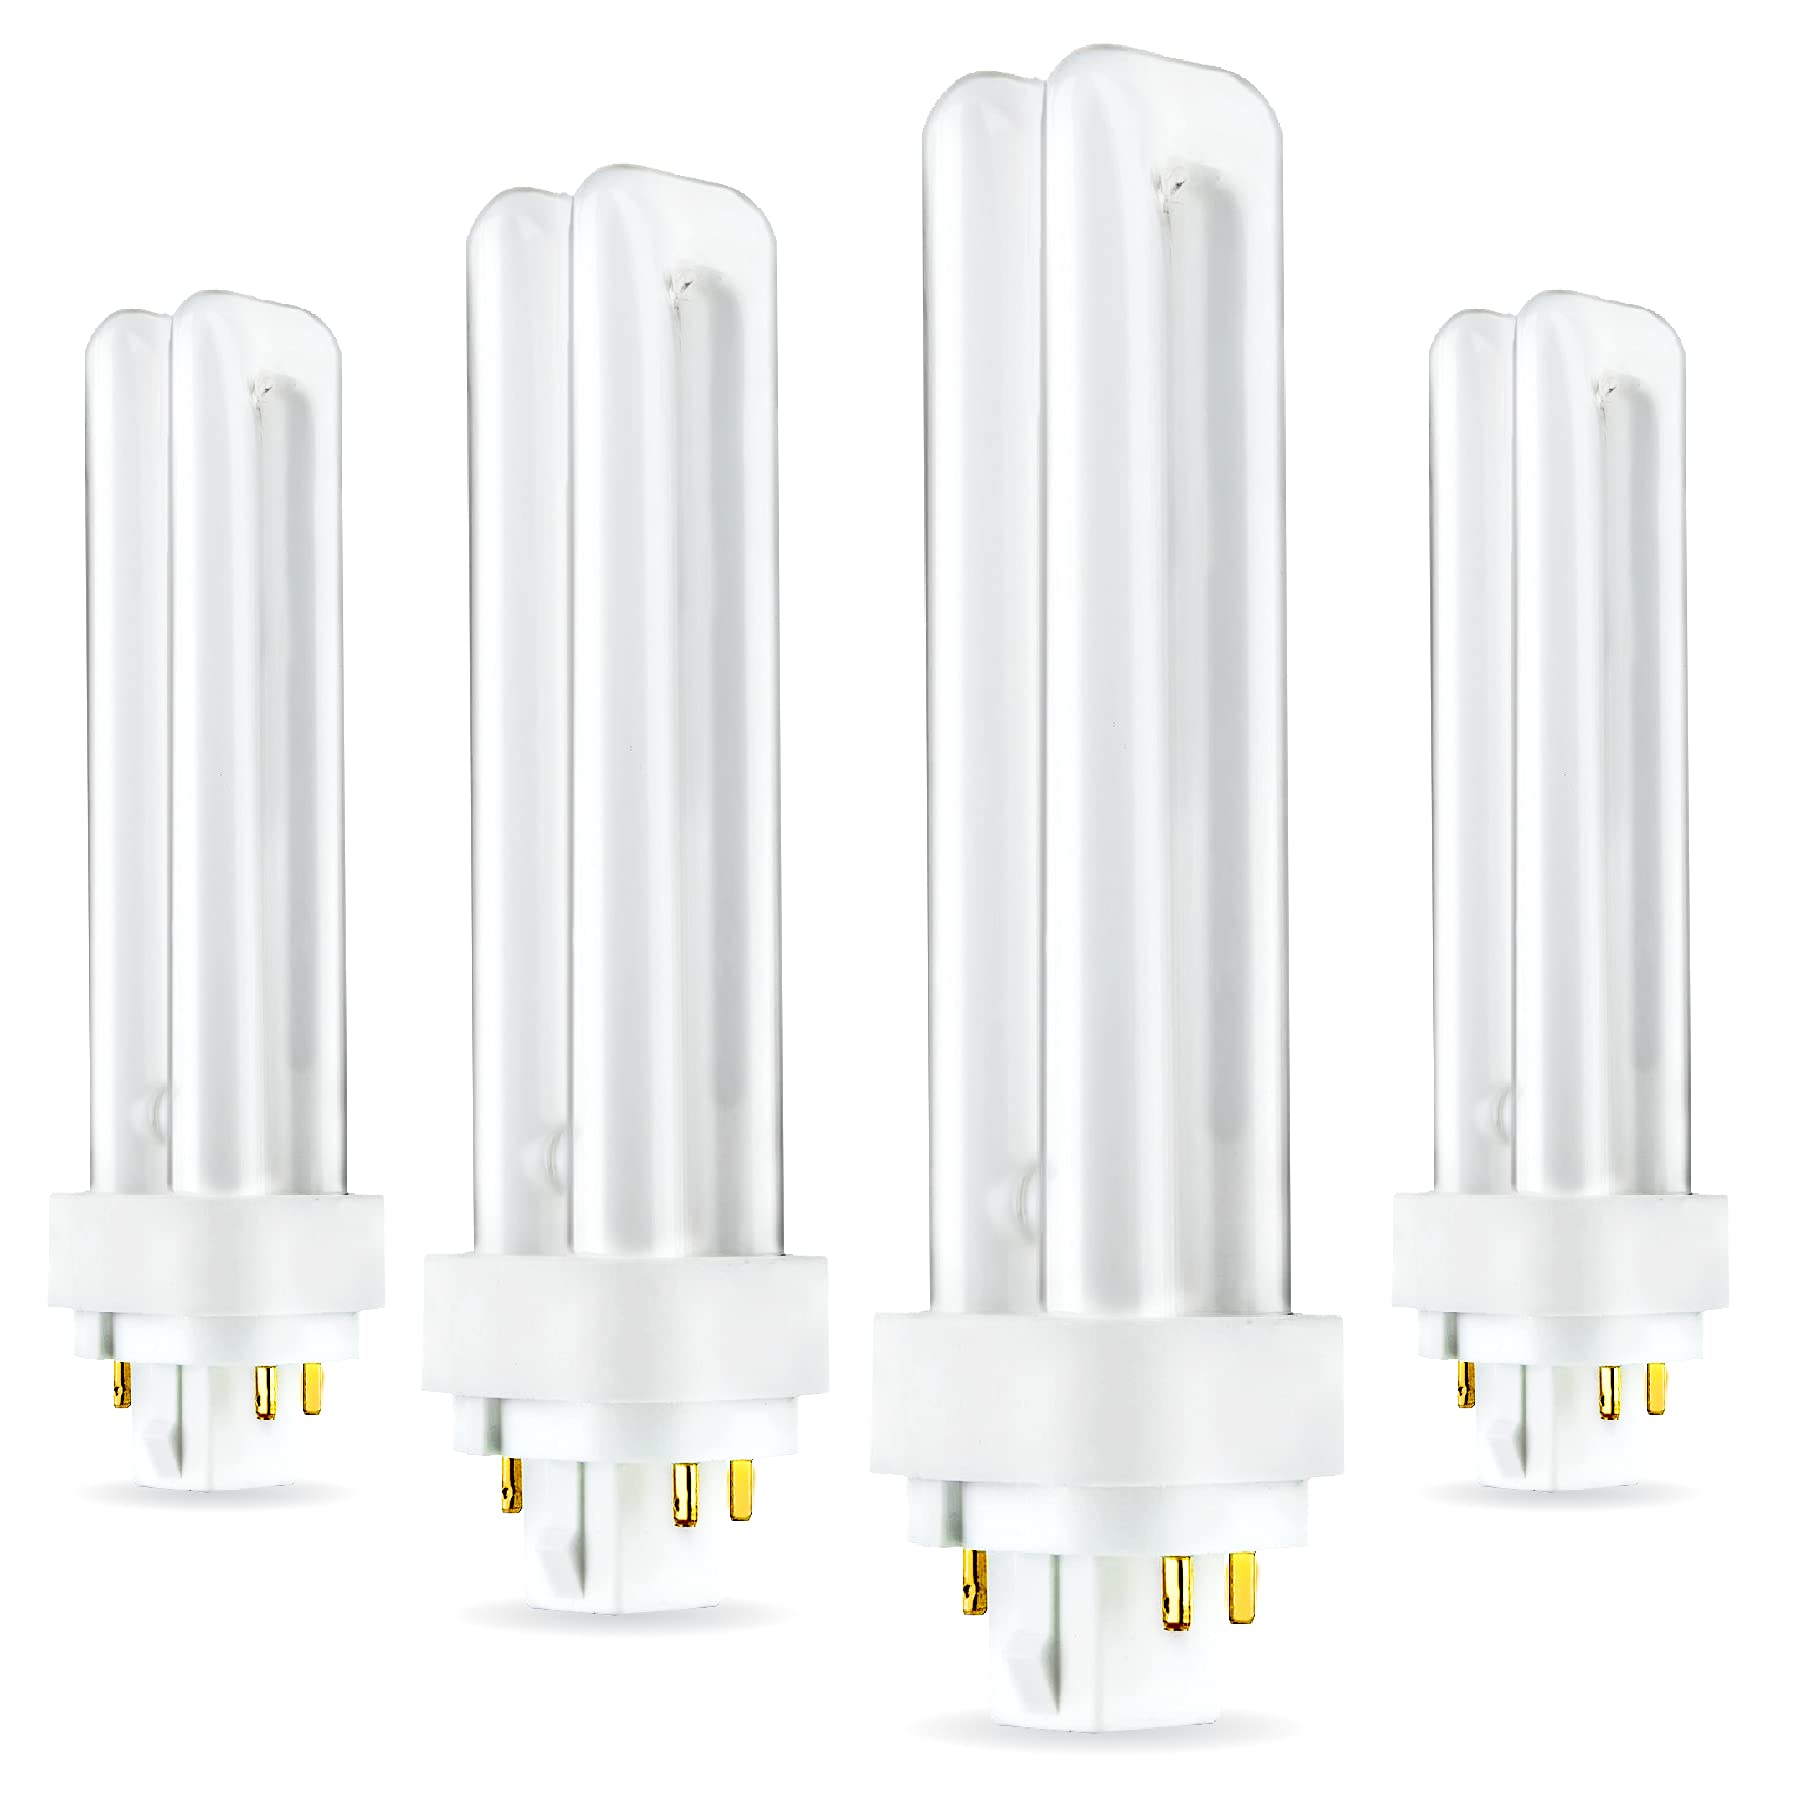 (4 Pack) PLC-18W 827, 4 Pin G24q-2, 18 Watt Double Tube, Compact Fluorescent Light Bulb, Replaces Sylvania 20683 and Philips 38329-9 - PL-C 18W/827/4P/ALTO  - Like New